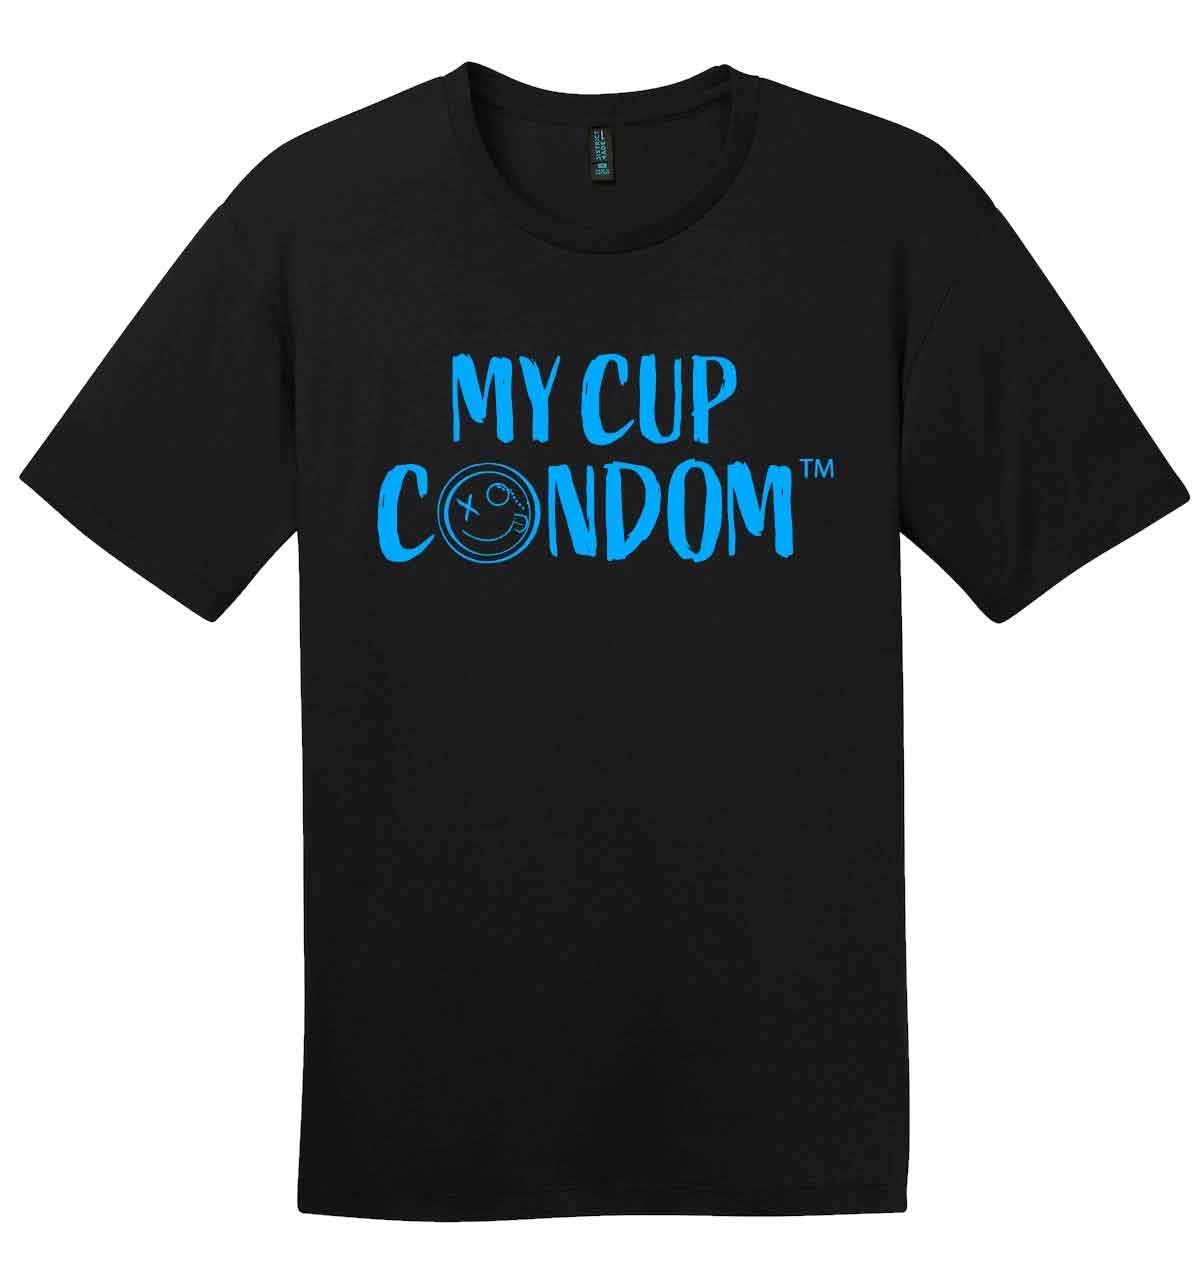 My Cup Condom™ T-Shirt